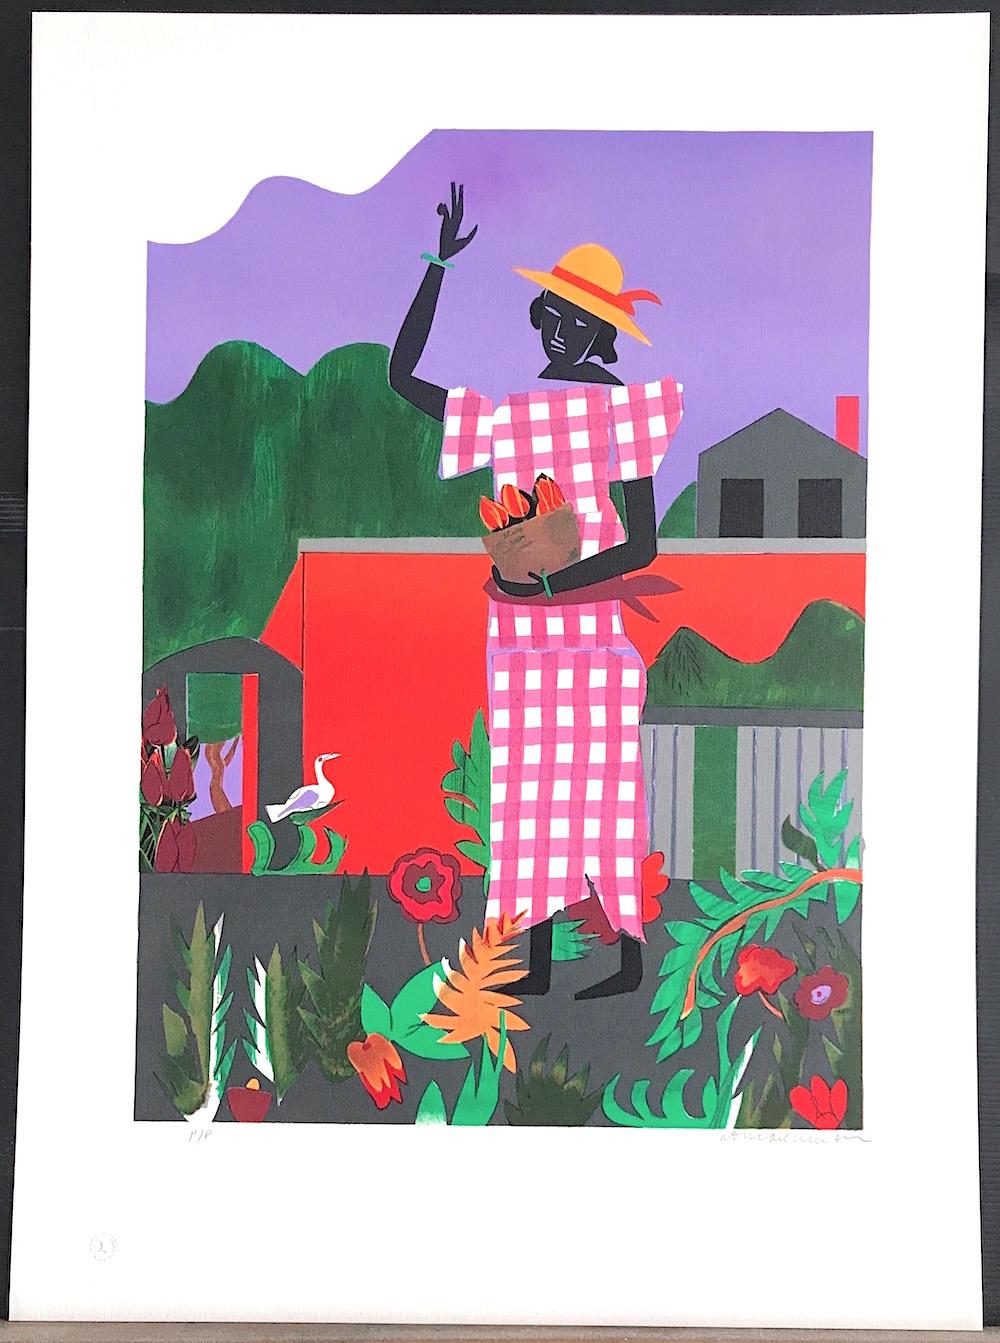 IN THE GARDEN Signed Lithograph, Black Woman Pink Gingham Dress Collage Portrait - Contemporary Print by Romare Bearden